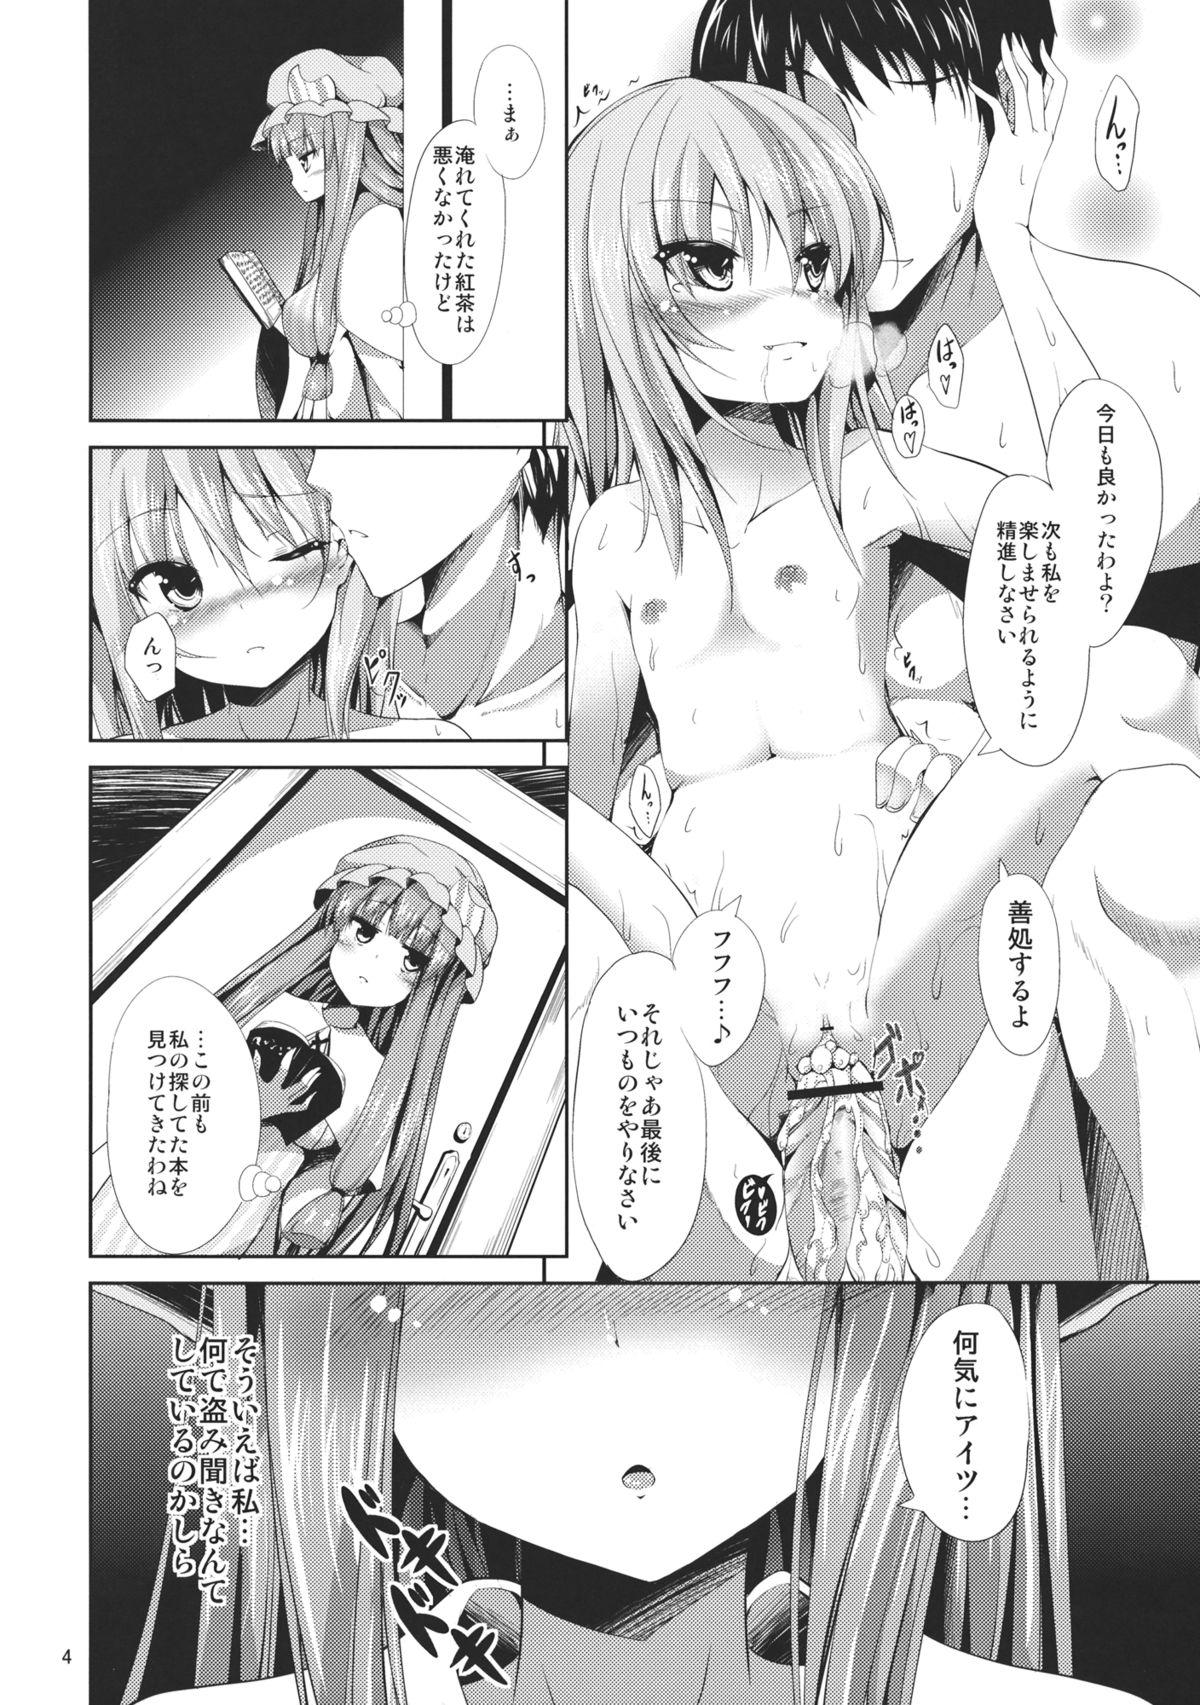 Audition Sweet nothingS - Touhou project Family Sex - Page 4